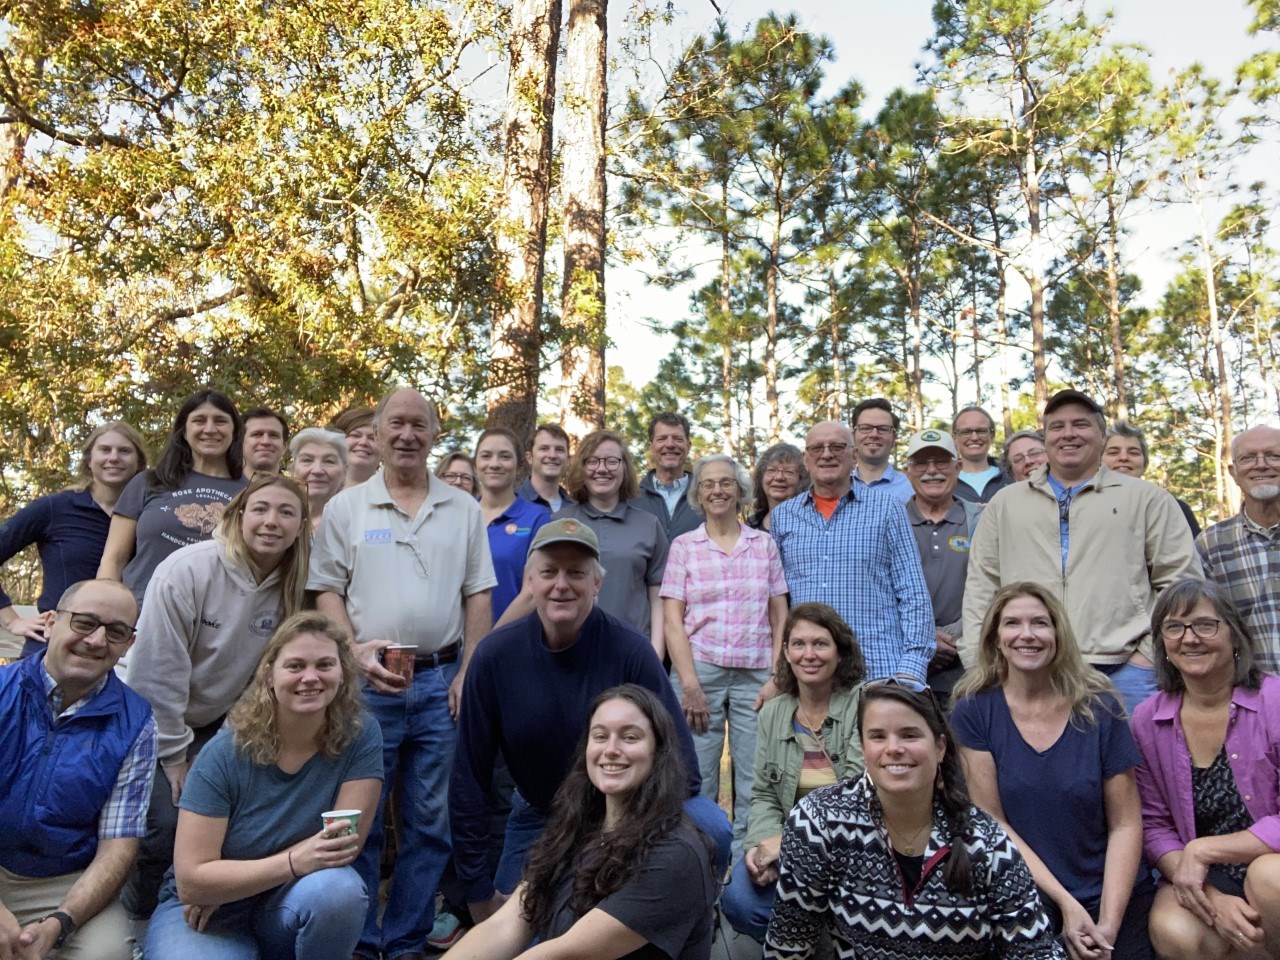 a group of around 30 smiling people of varying ages pose for a photo in the forest